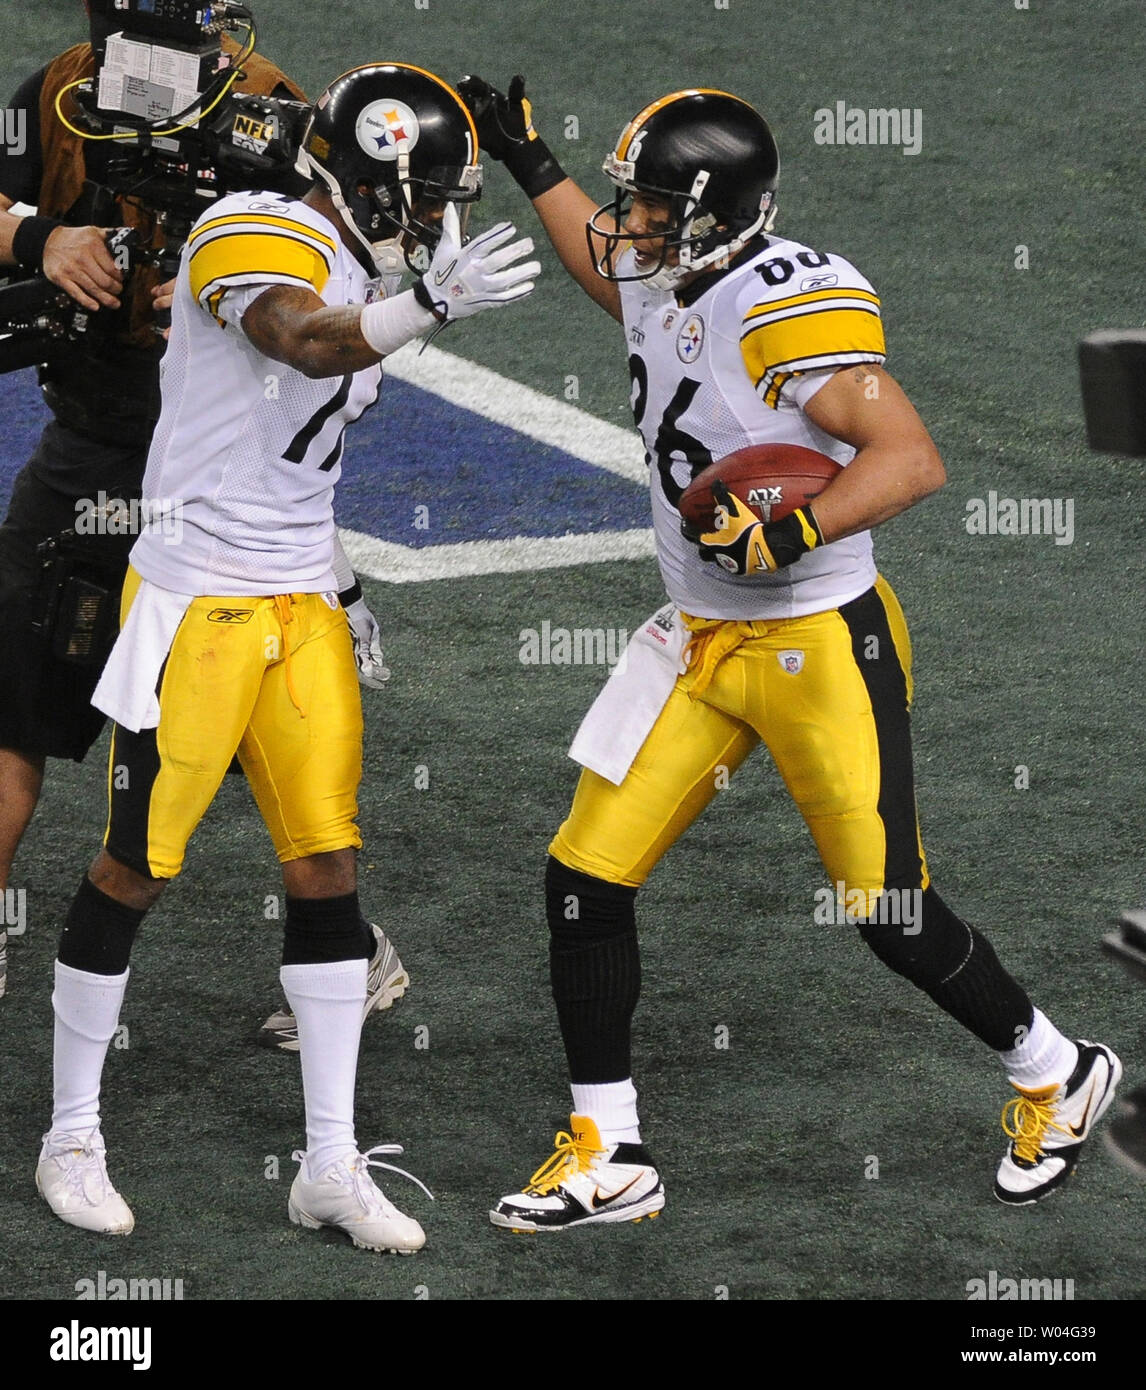 Pittsburgh Steelers wide receiver Hines Ward celebrates a second quarter touchdown against Green Bay Packers during Super Bowl XLV at Cowboys Stadium in Arlington, Texas on February 6, 2011.    UPI/Jon Soohoo Stock Photo